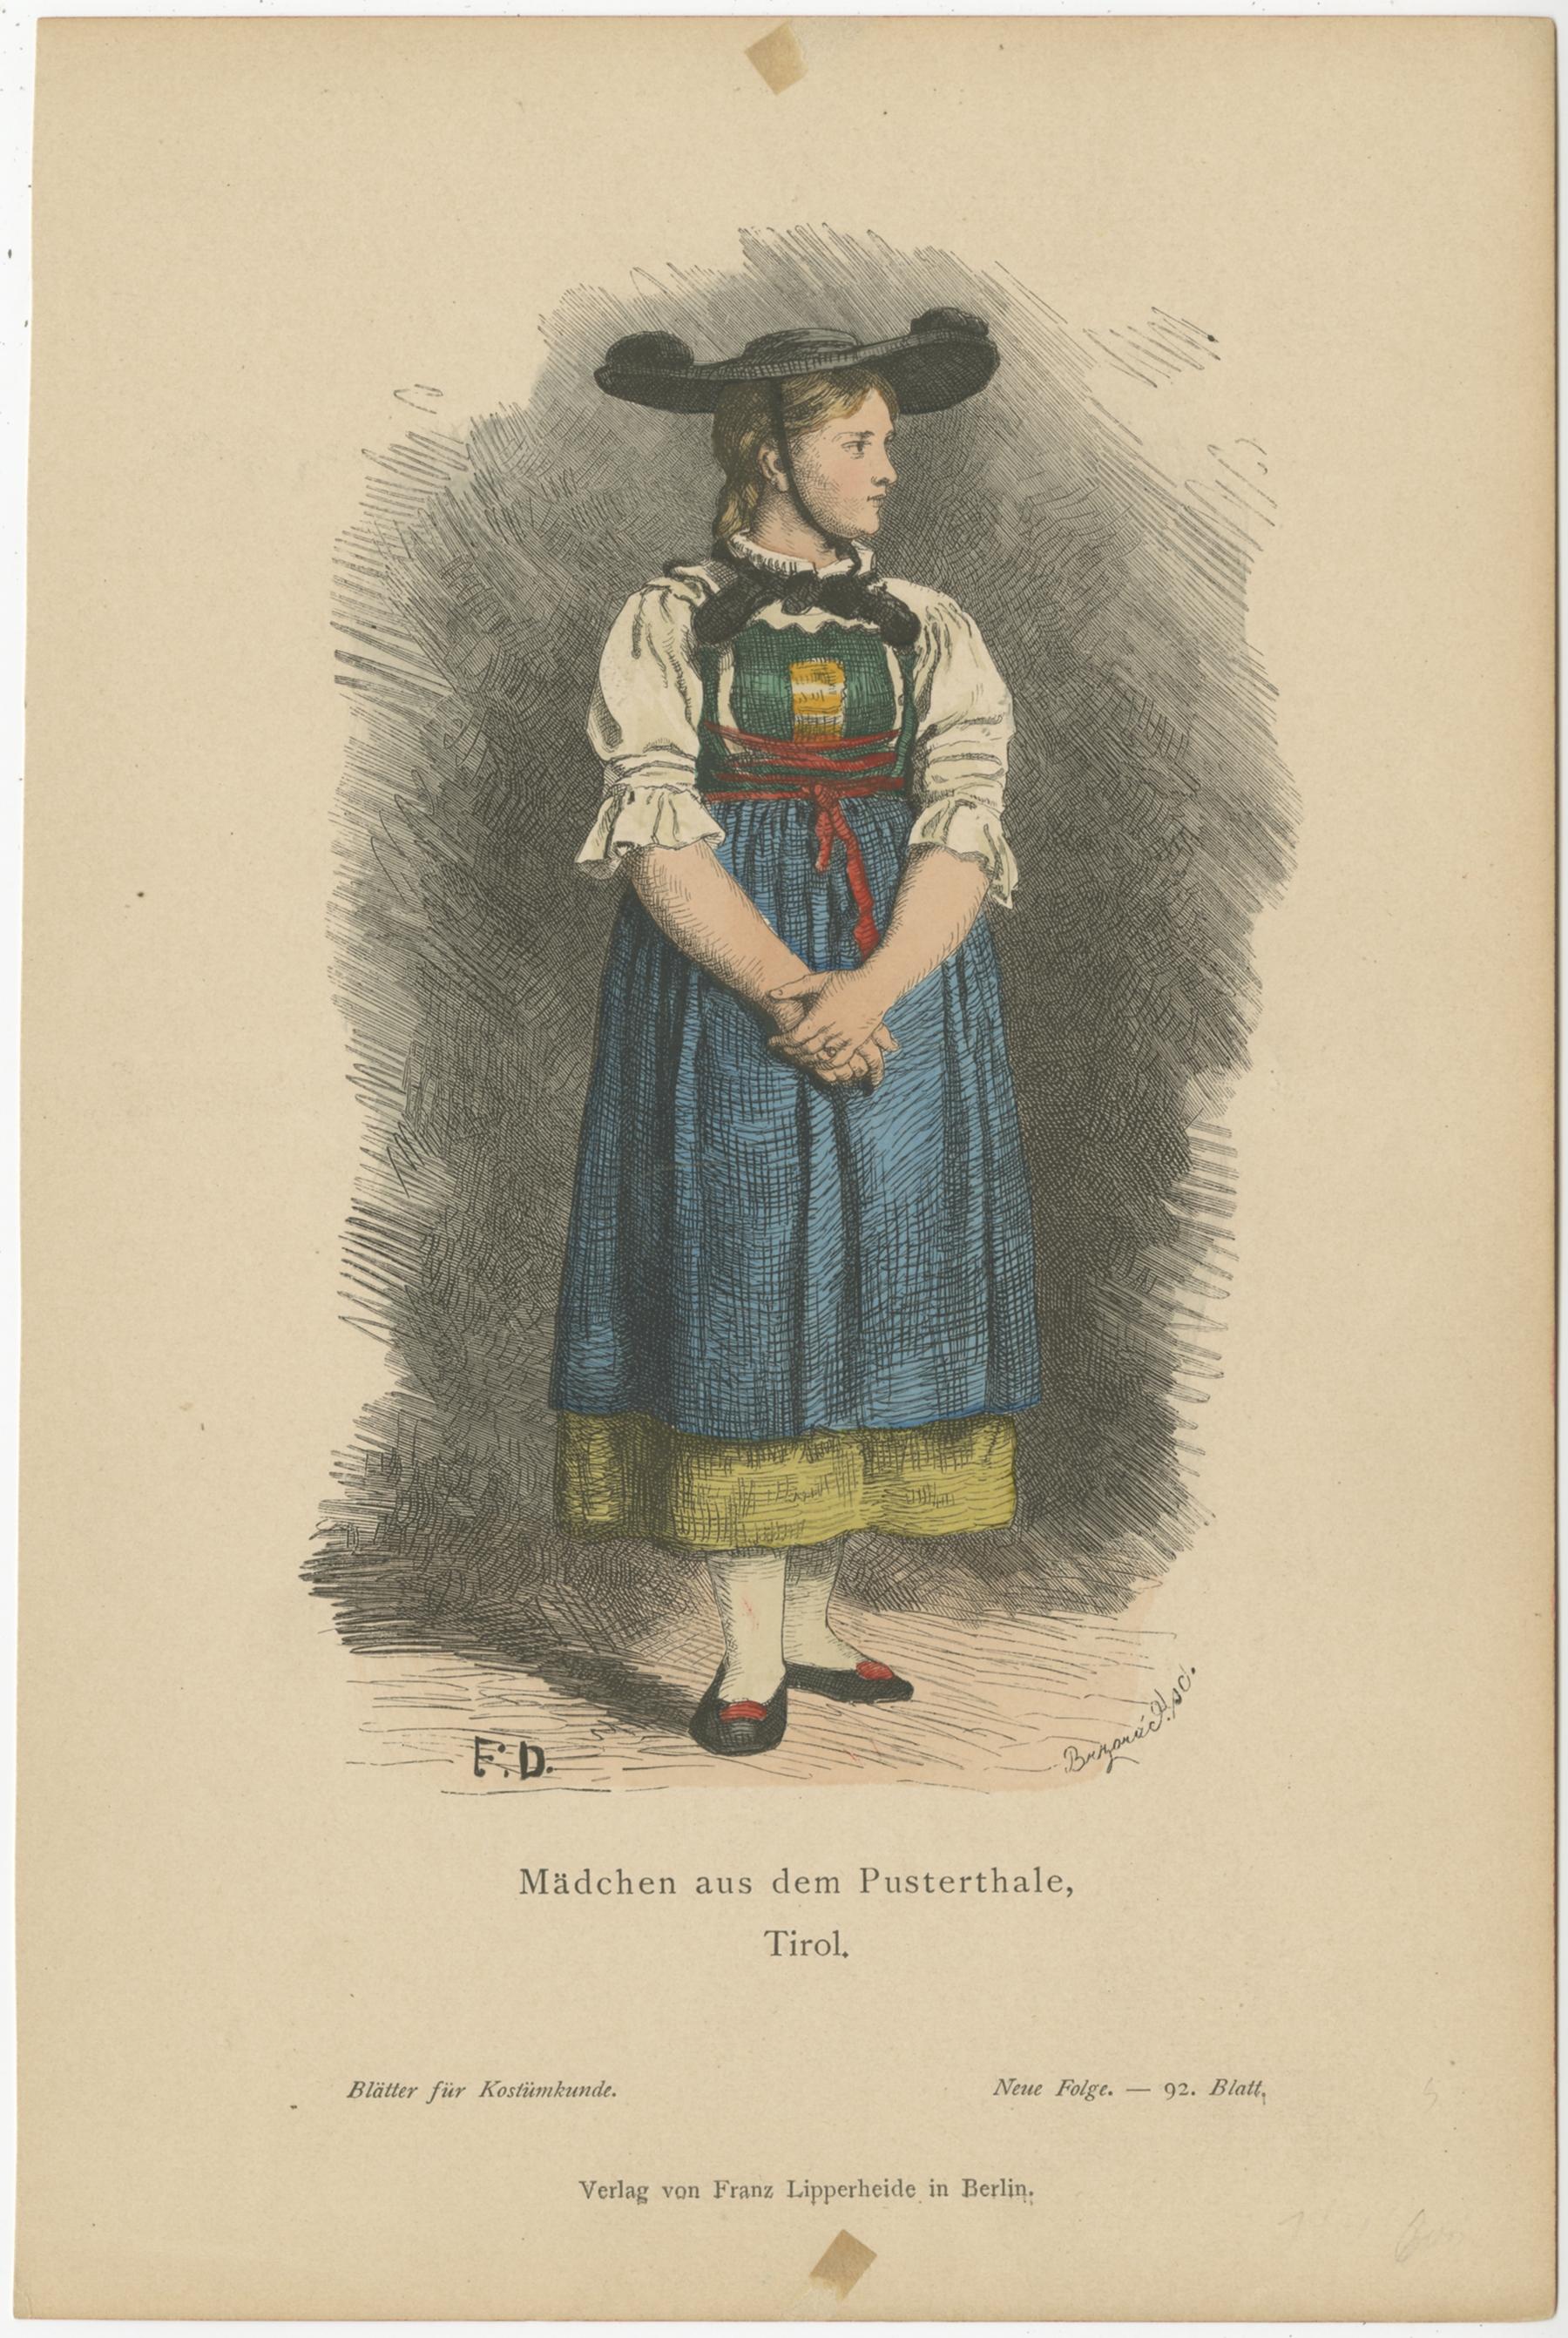 Antique costume print titled 'Mädchen aus dem Pusterthale, Tirol'. Old print showing a girl from Val Pusteria, Tyrol. This print originates from 'Blätter für Kostümkunde'. 

The Puster Valley is one of the largest longitudinal valleys in the Alps